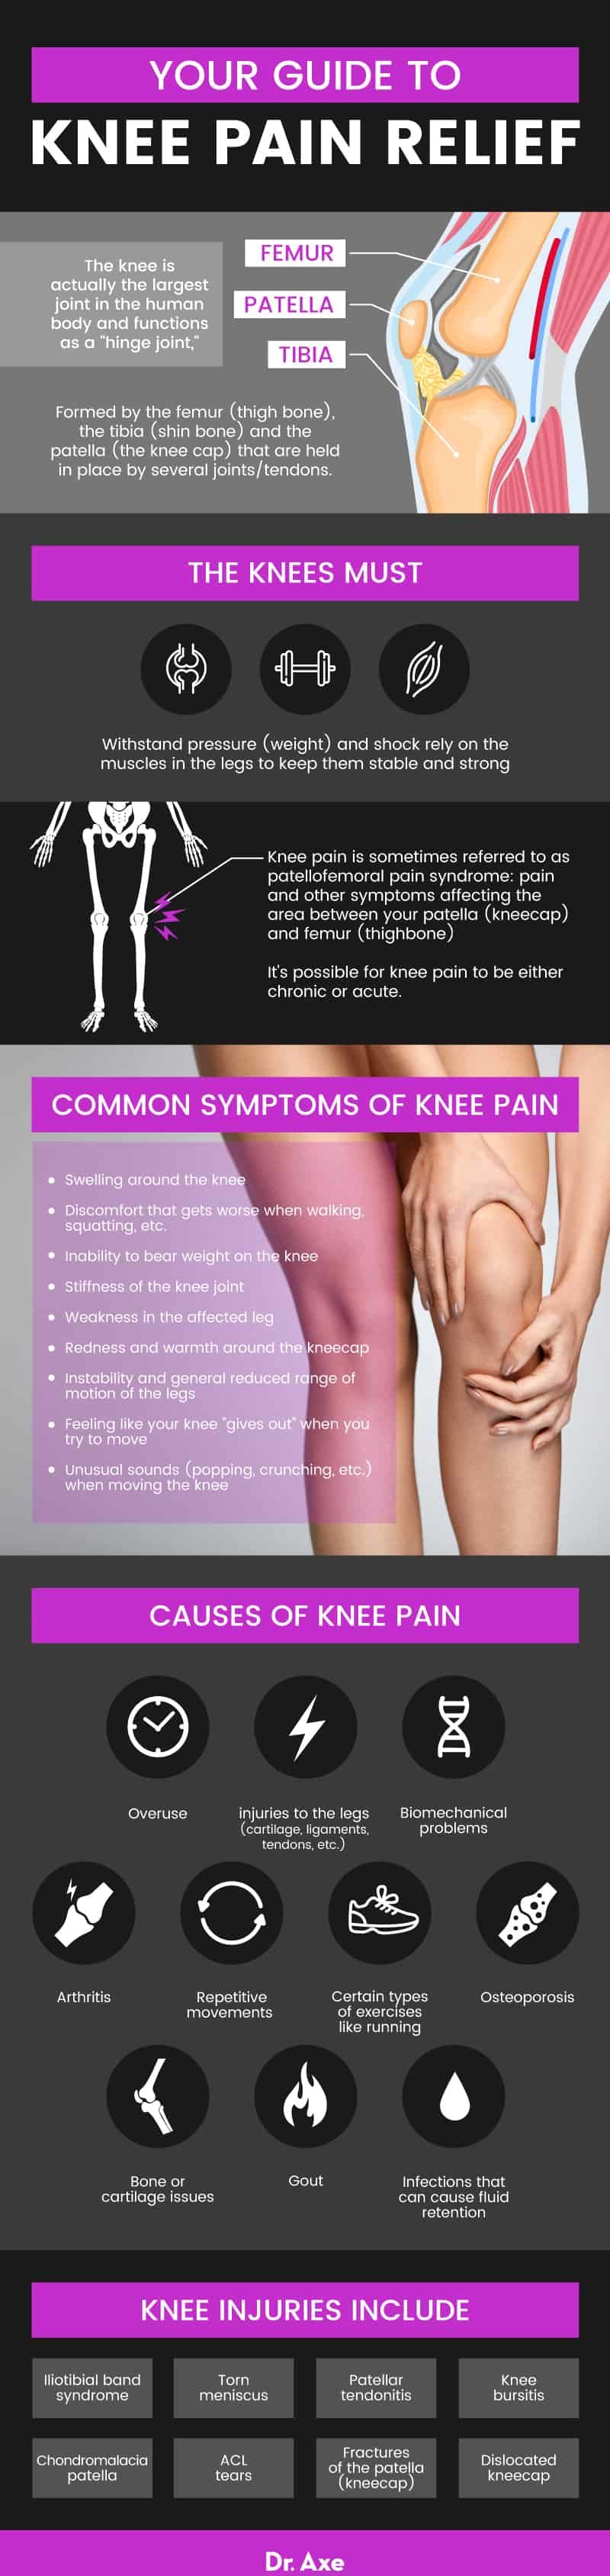 Guide to knee pain relief - Dr. Axe